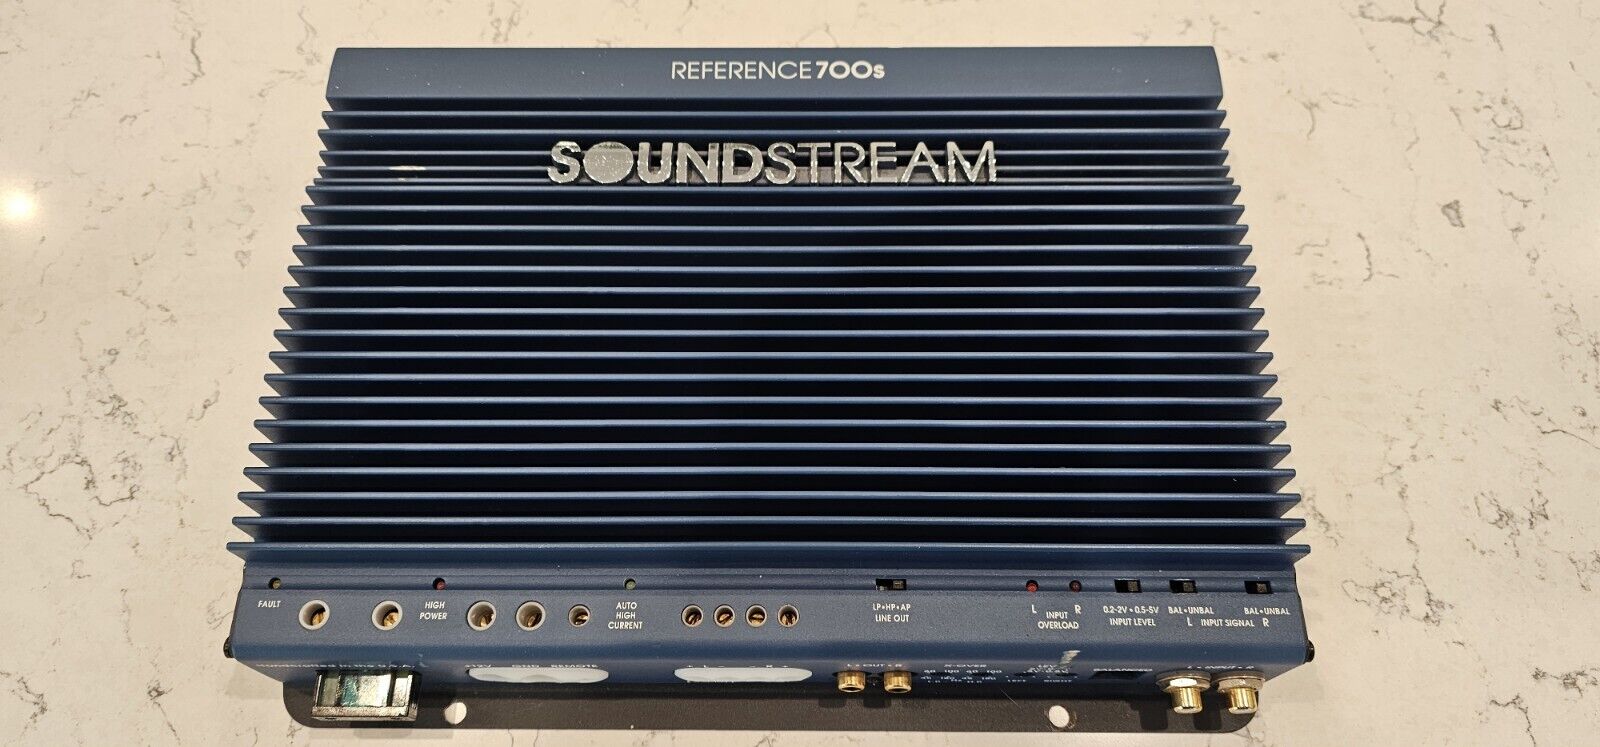 Soundstream Reference 700s Vintage Old School Classic Car Audio